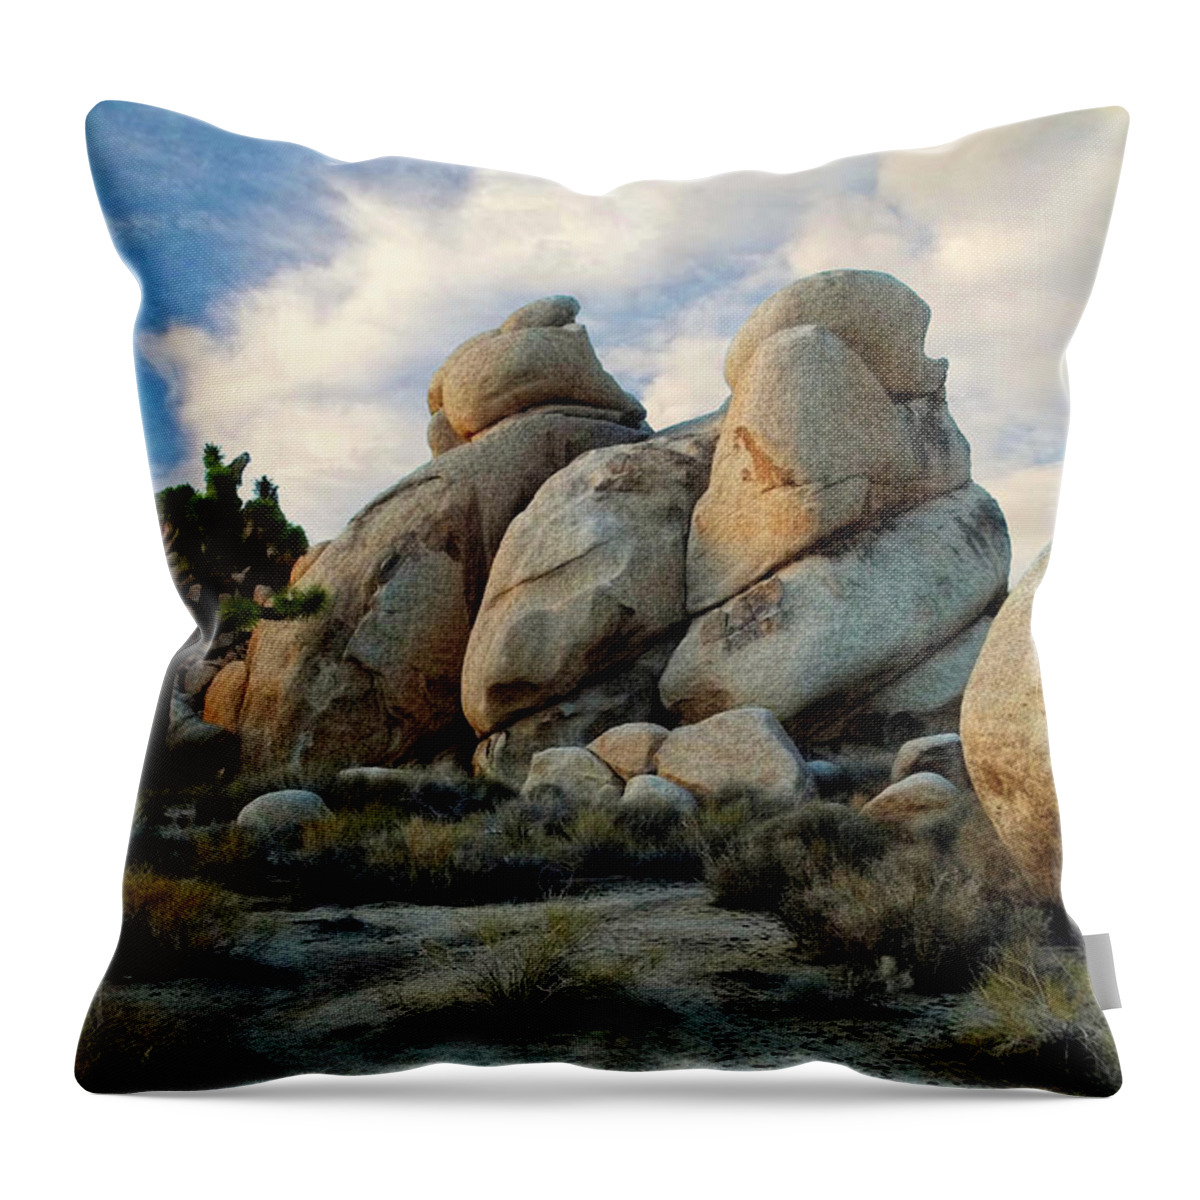 Joshua Tree National Park Throw Pillow featuring the photograph Joshua Tree Rock Formations At Dusk by Glenn McCarthy Art and Photography